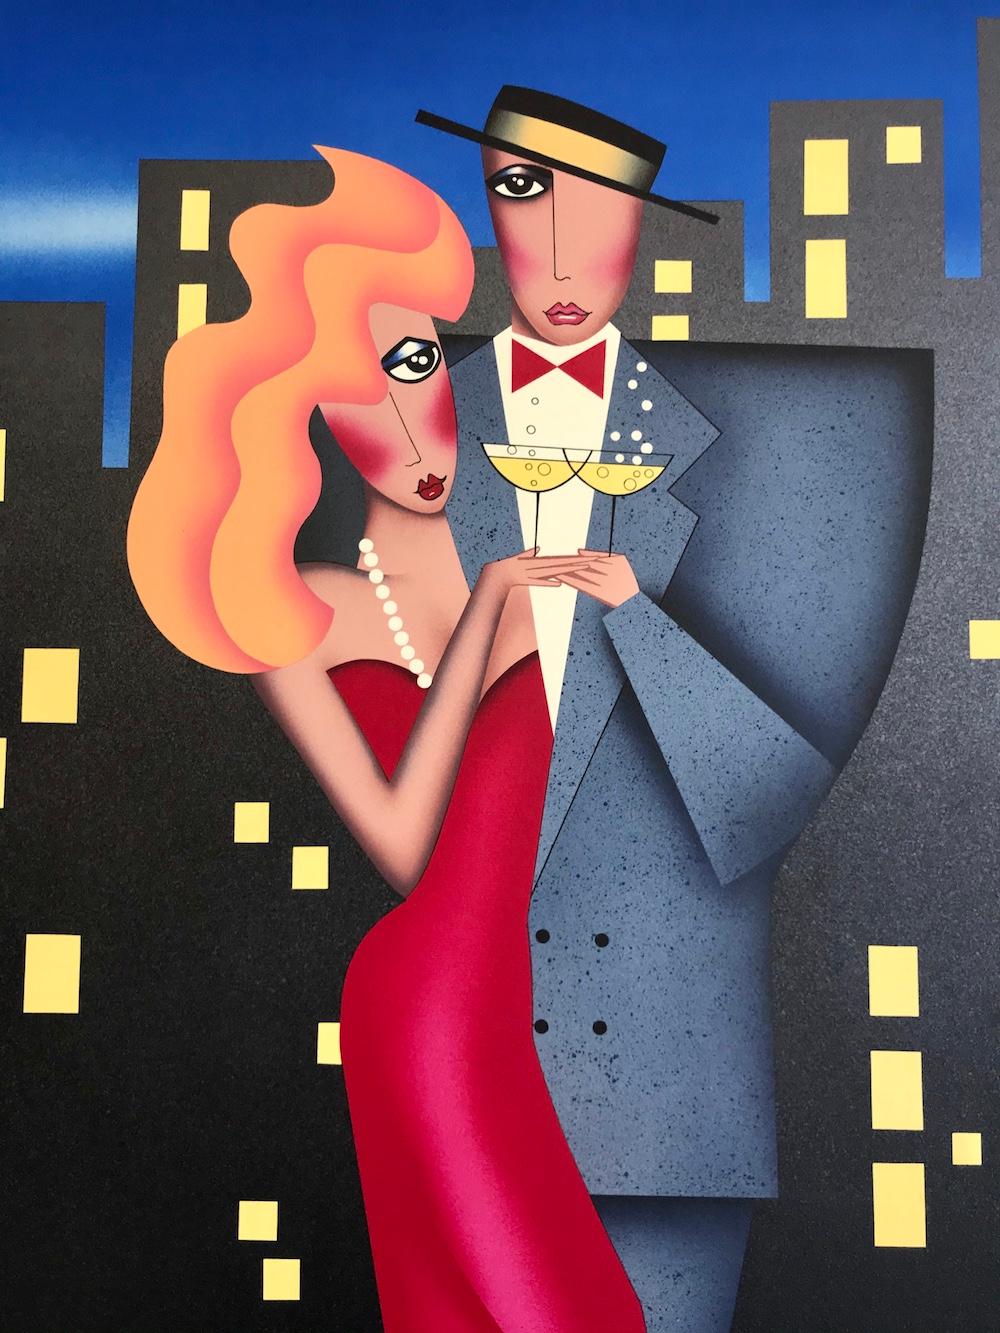 CITY LIGHTS Signed Lithograph, City Couple Portrait, Date Night, Champagne - Print by Robin Morris